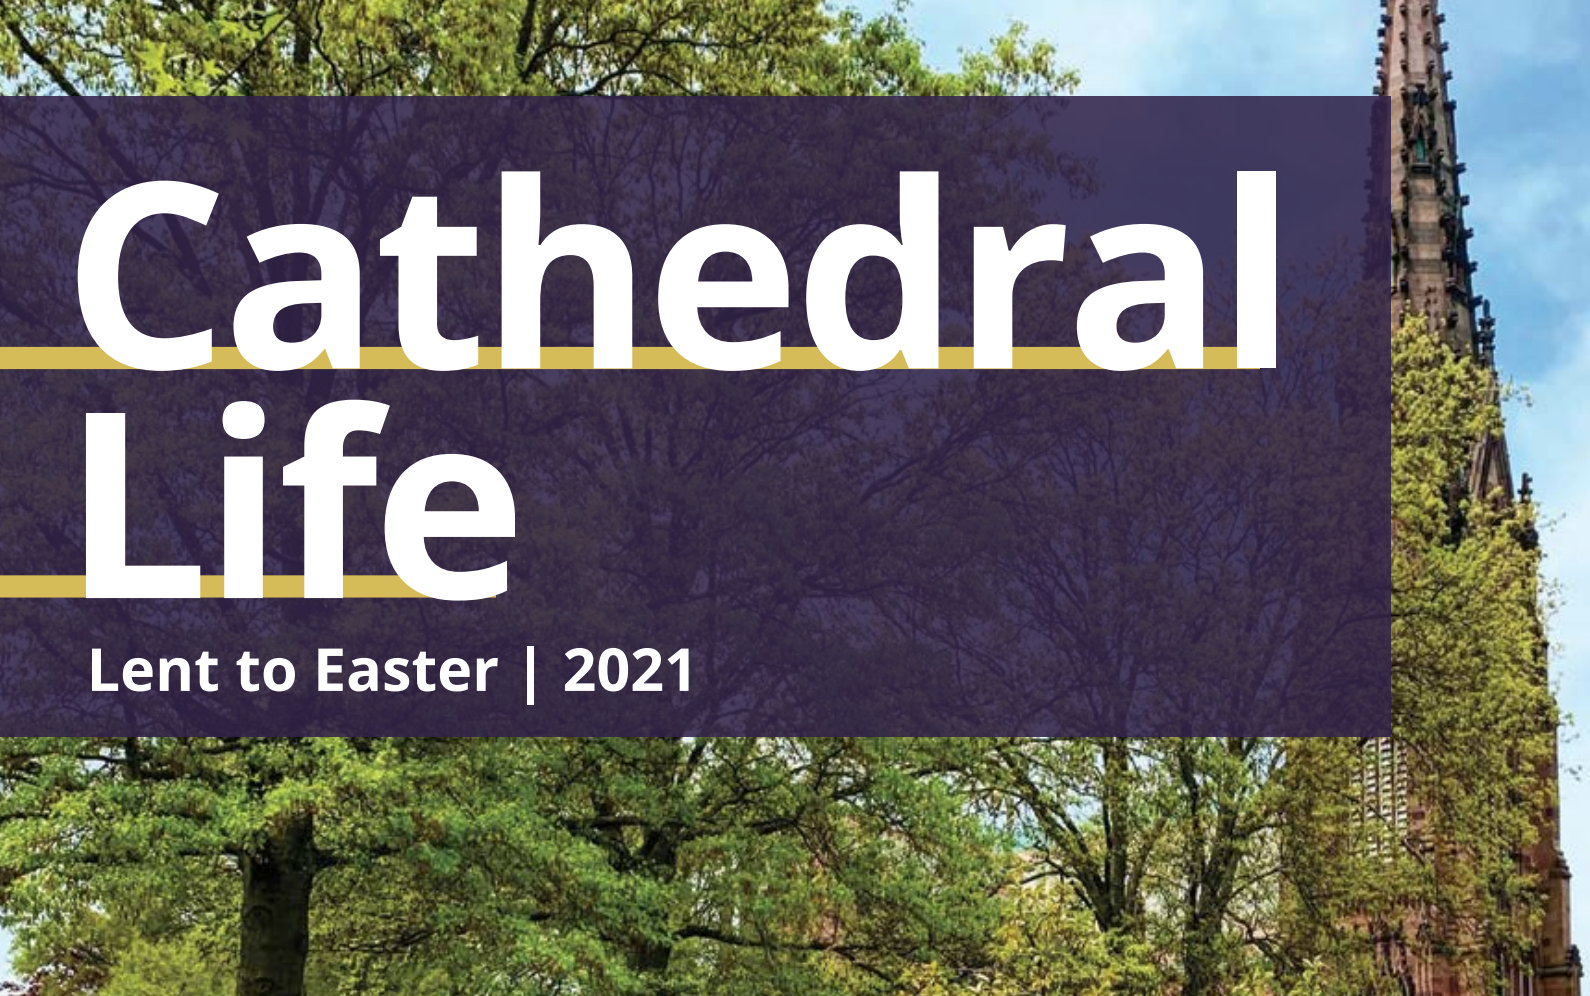 An image of the front cover of our Cathedral Life brochure